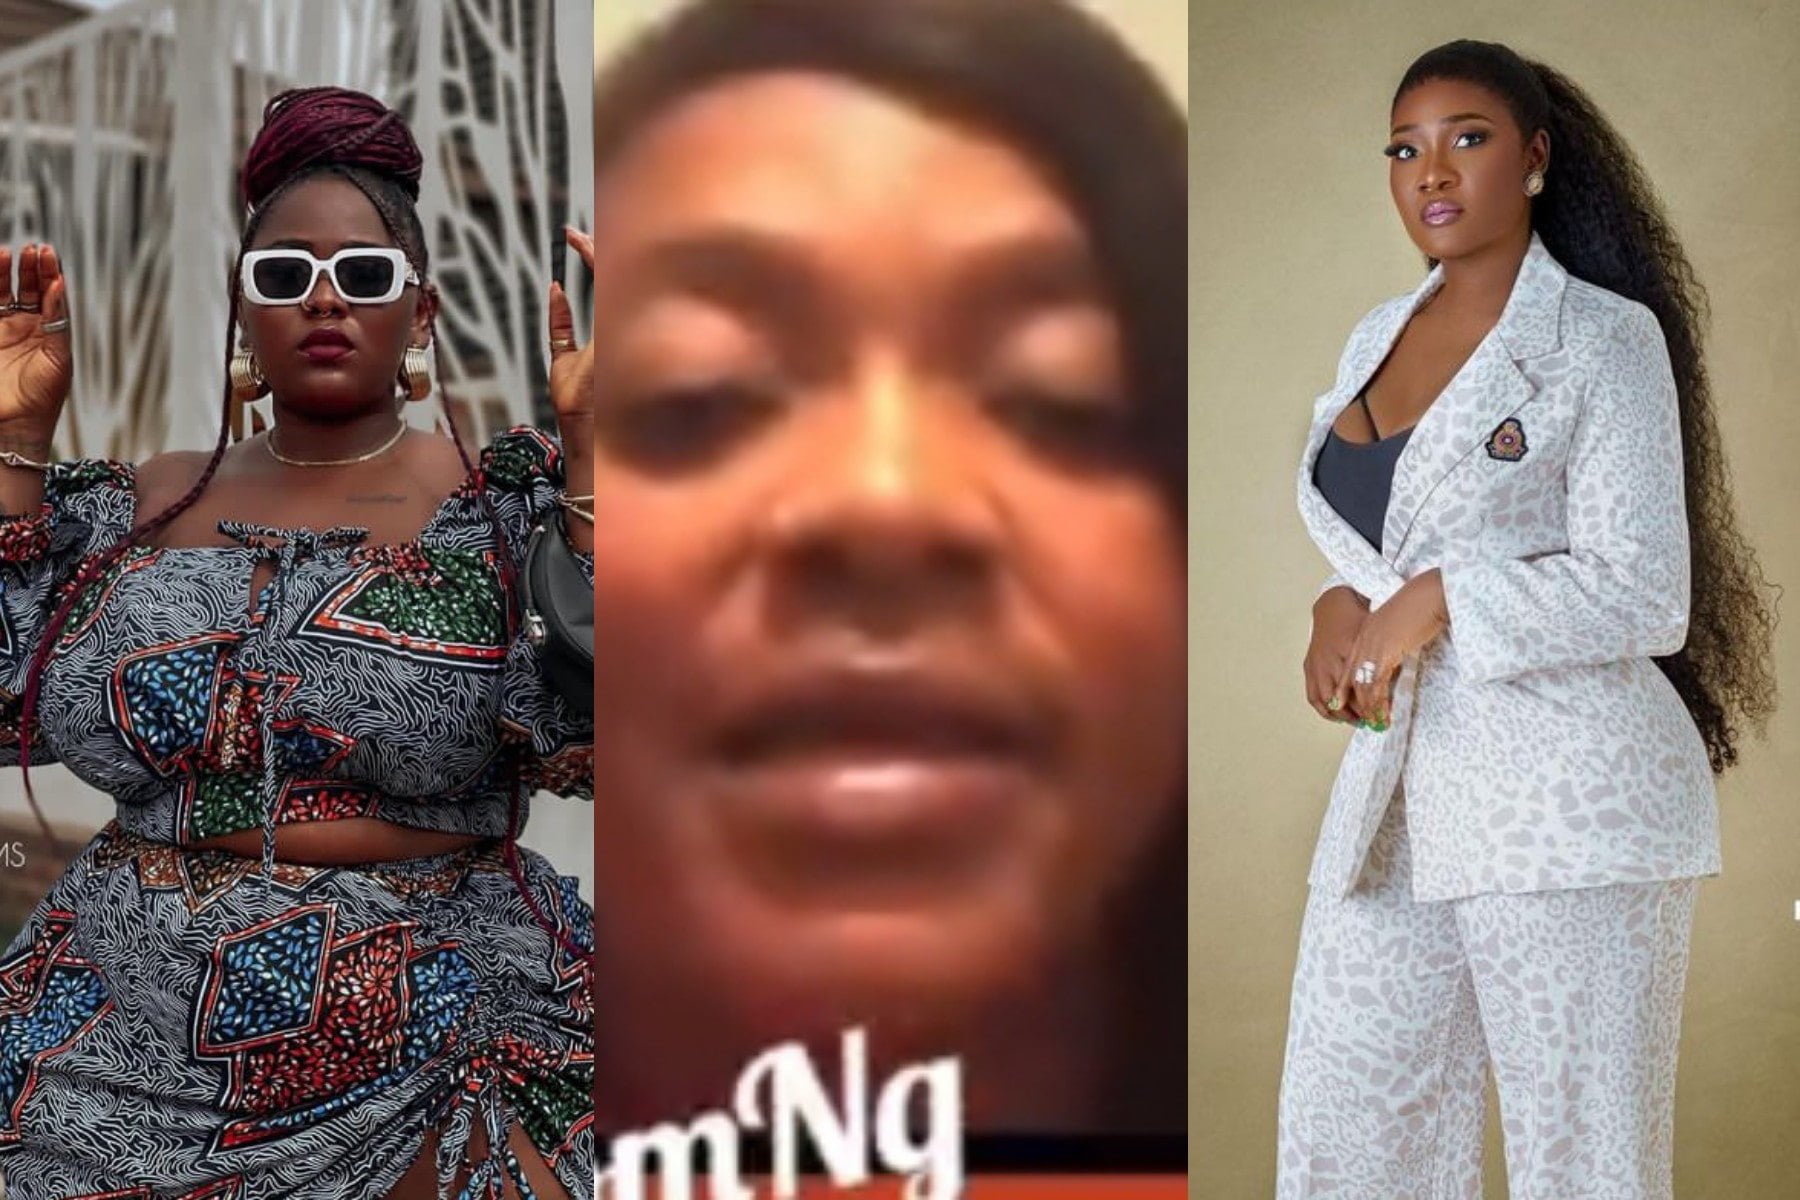 “This is why I get tired of having female friends” – Monalisa Stephen reacts to Mercy Johnson’s former bestfriend allegations on her